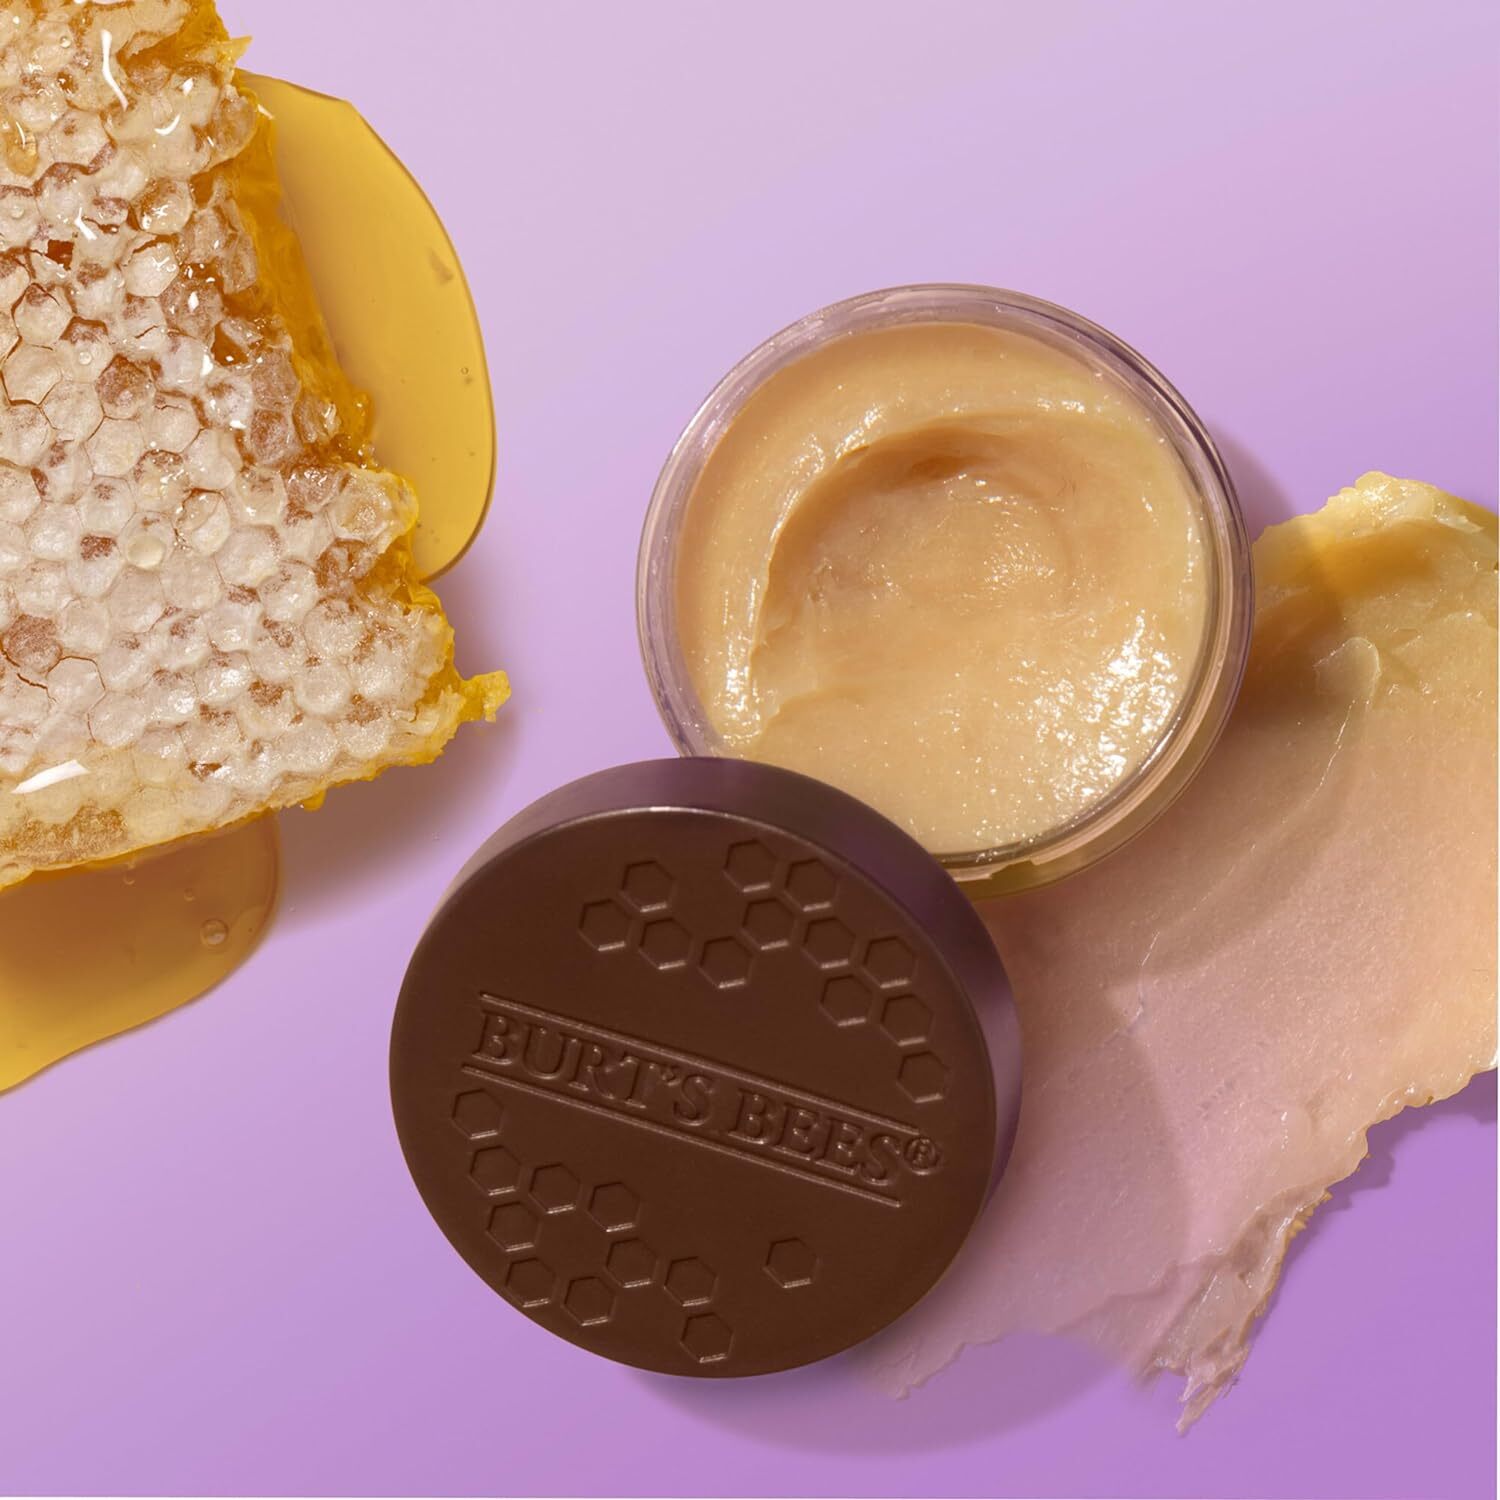 Open jar of Burt&#x27;s Bees cream with honeycomb and lid nearby, suggesting natural ingredients in a product showcase